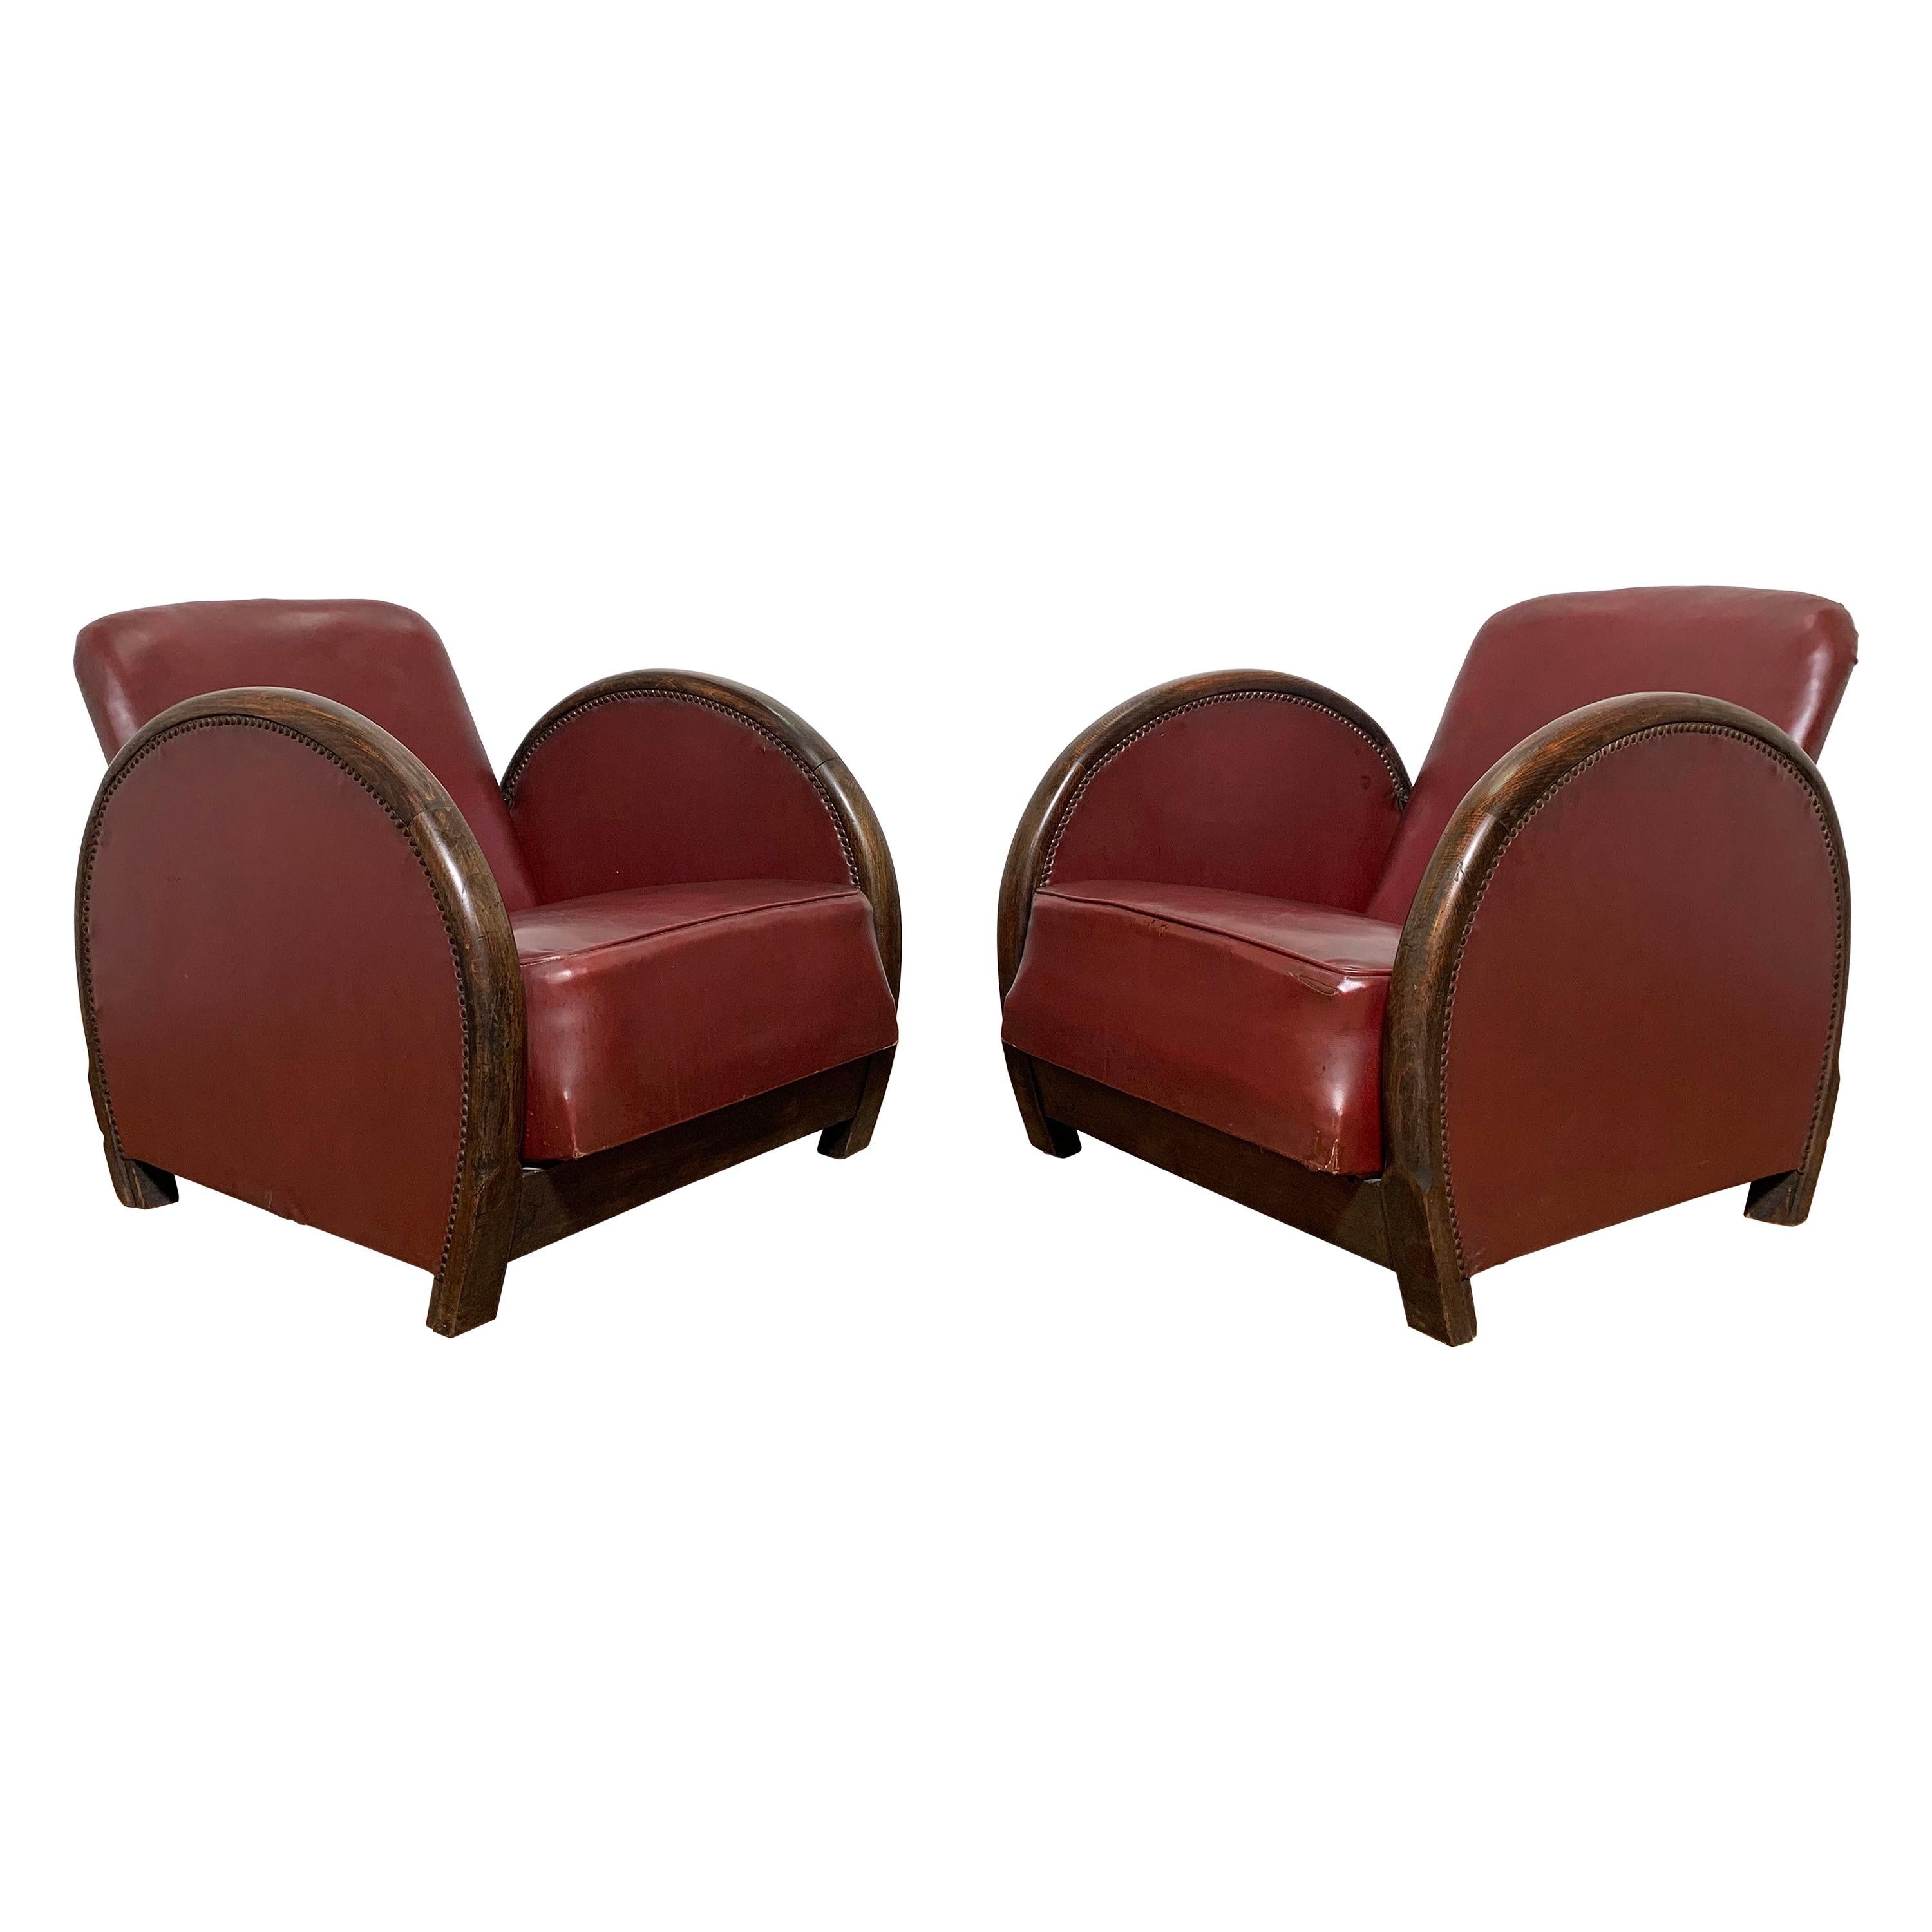 Pair of Art Deco Reclining Leather and Walnut Lounge Chairs, Ca. 1930s